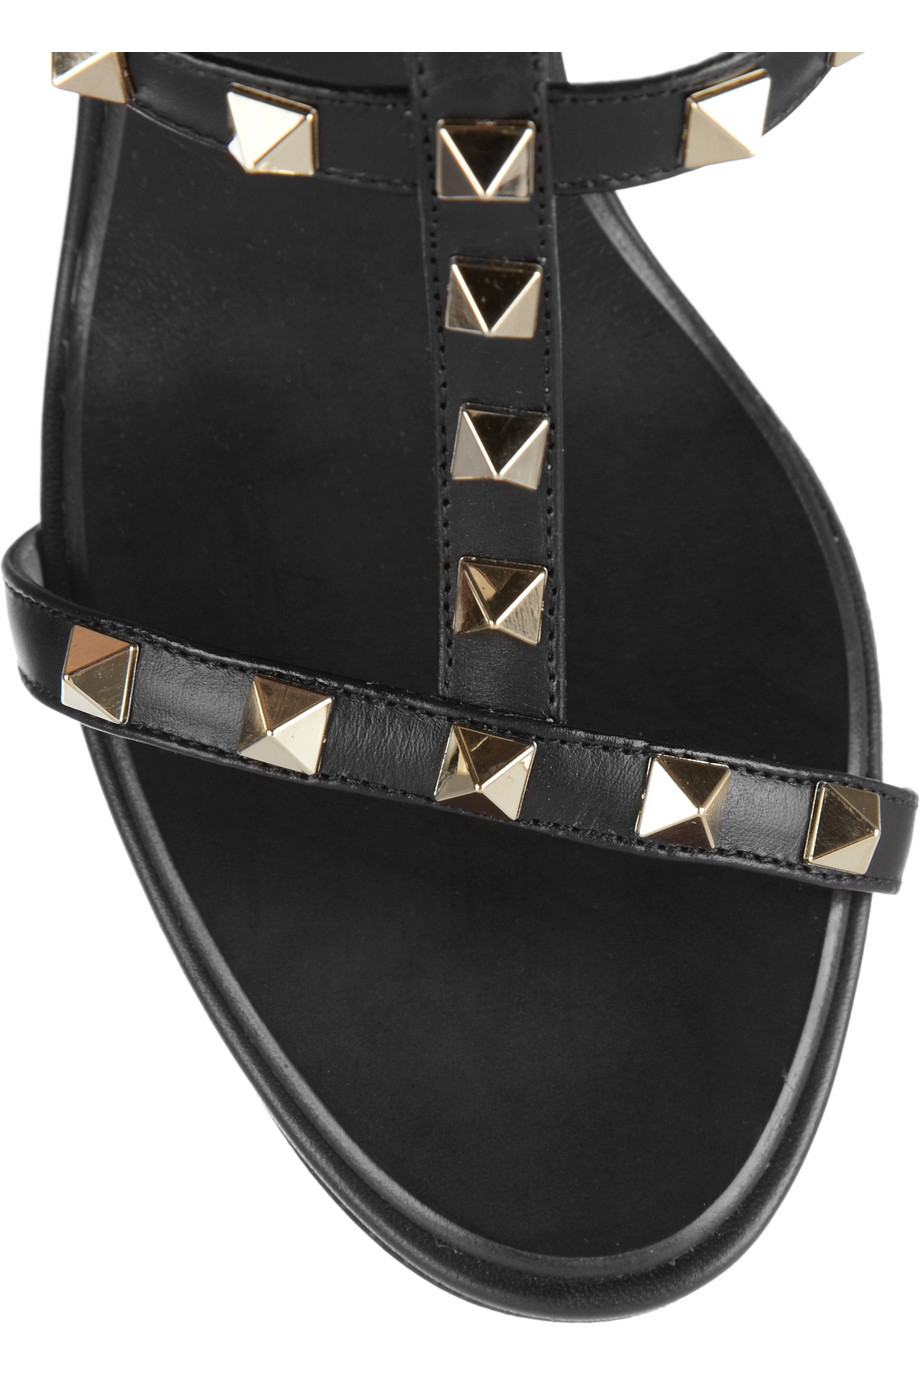  Valentino  Studded Leather Sandals  in Black Lyst